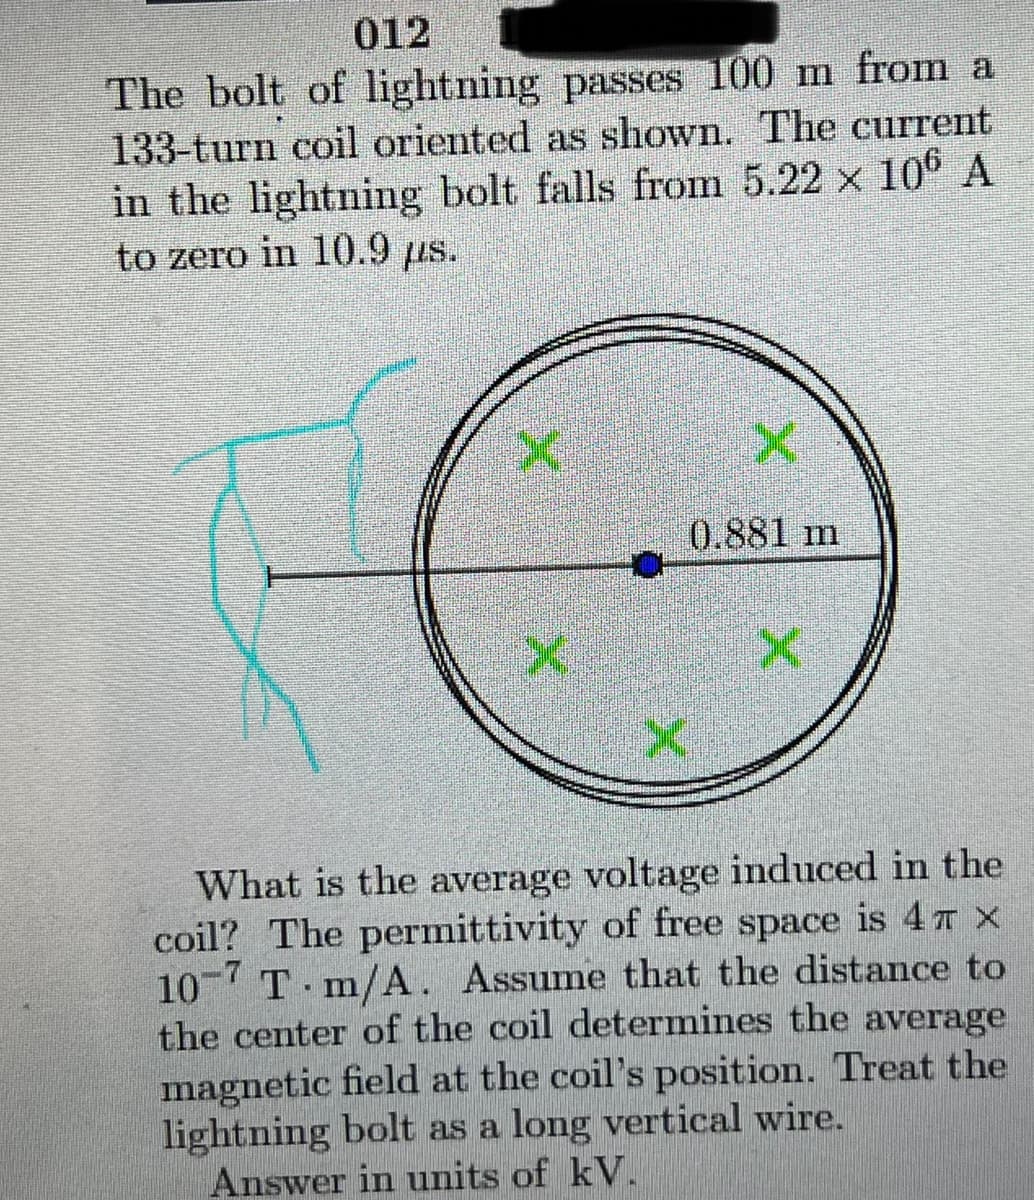 012
The bolt of lightning passes 100 m from a
133-turn coil oriented as shown. The current
in the lightning bolt falls from 5.22 x 106A
to zero in 10.9 us.
0.881 m
What is the average voltage induced in the
coil? The permittivity of free space is 4T X
10 T m/A. Assume that the distance to
the center of the coil determines the average
magnetic field at the coil's position. Treat the
lightning bolt as a long vertical wire.
Answer in units of kV.
